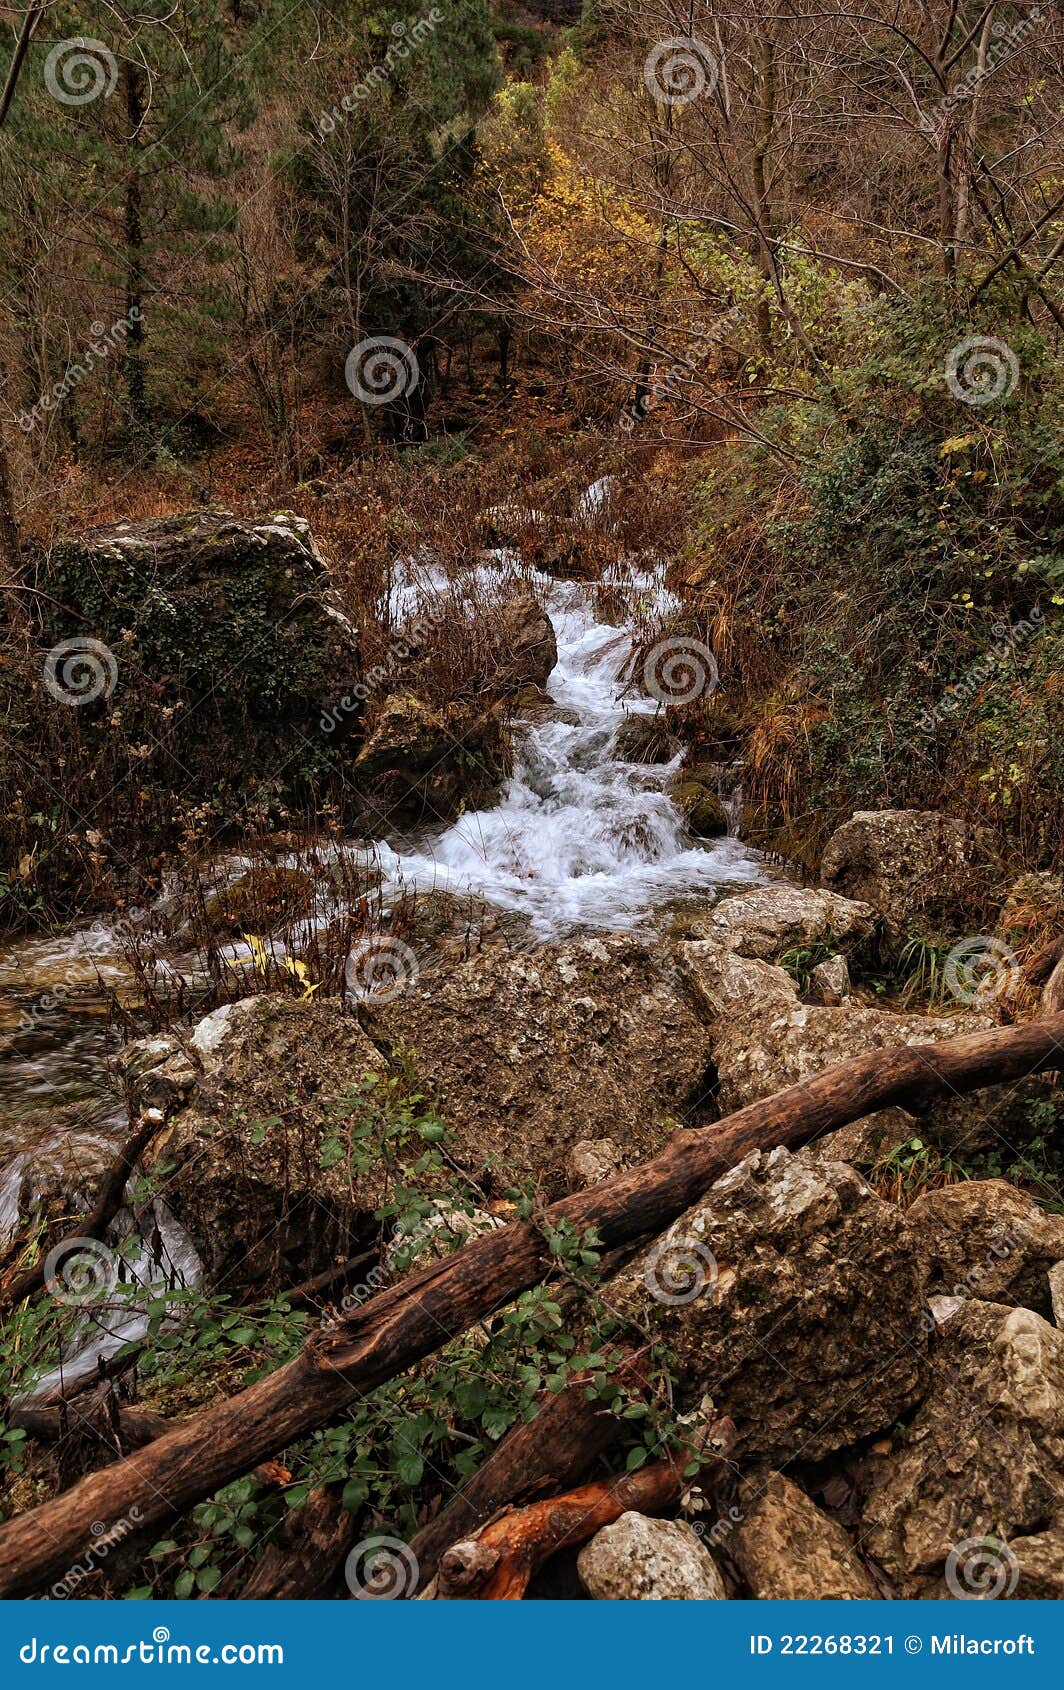 spain: source of the mundo river